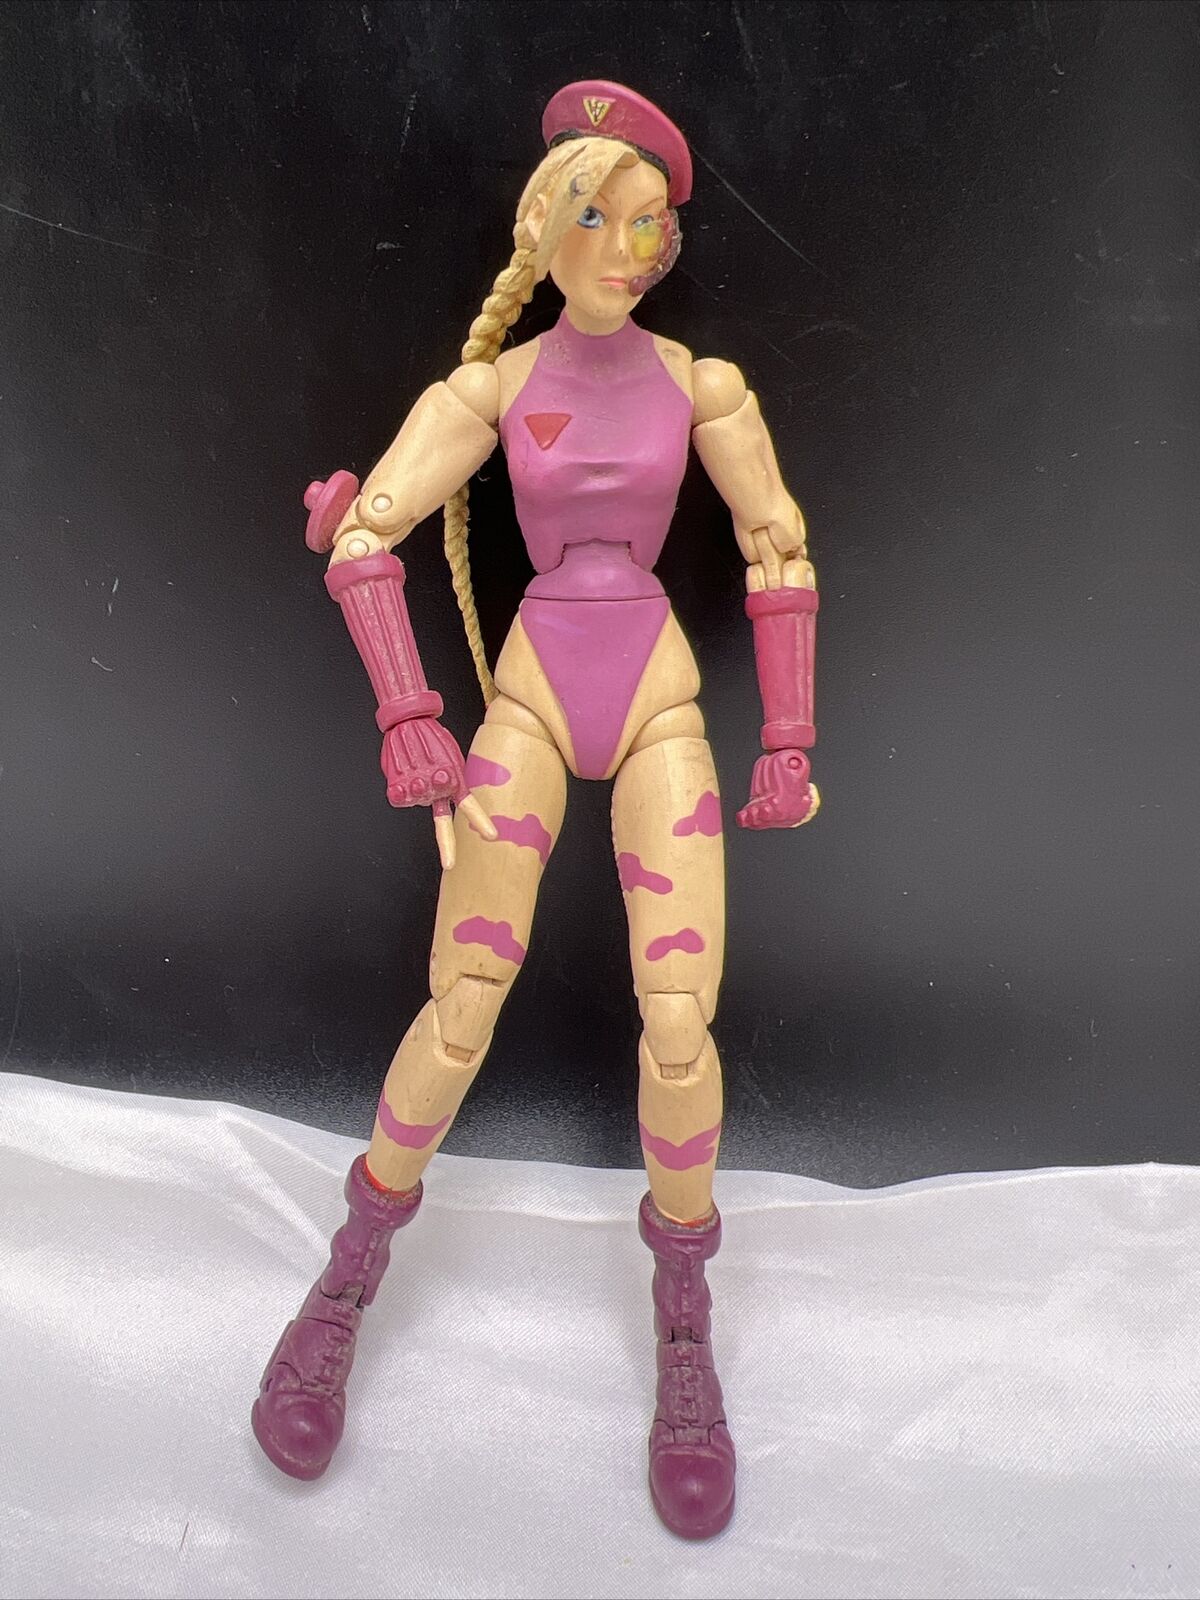 Sota Toys Cammy Street Fighter Capcom Round 2 2005 Pink variant Action figure